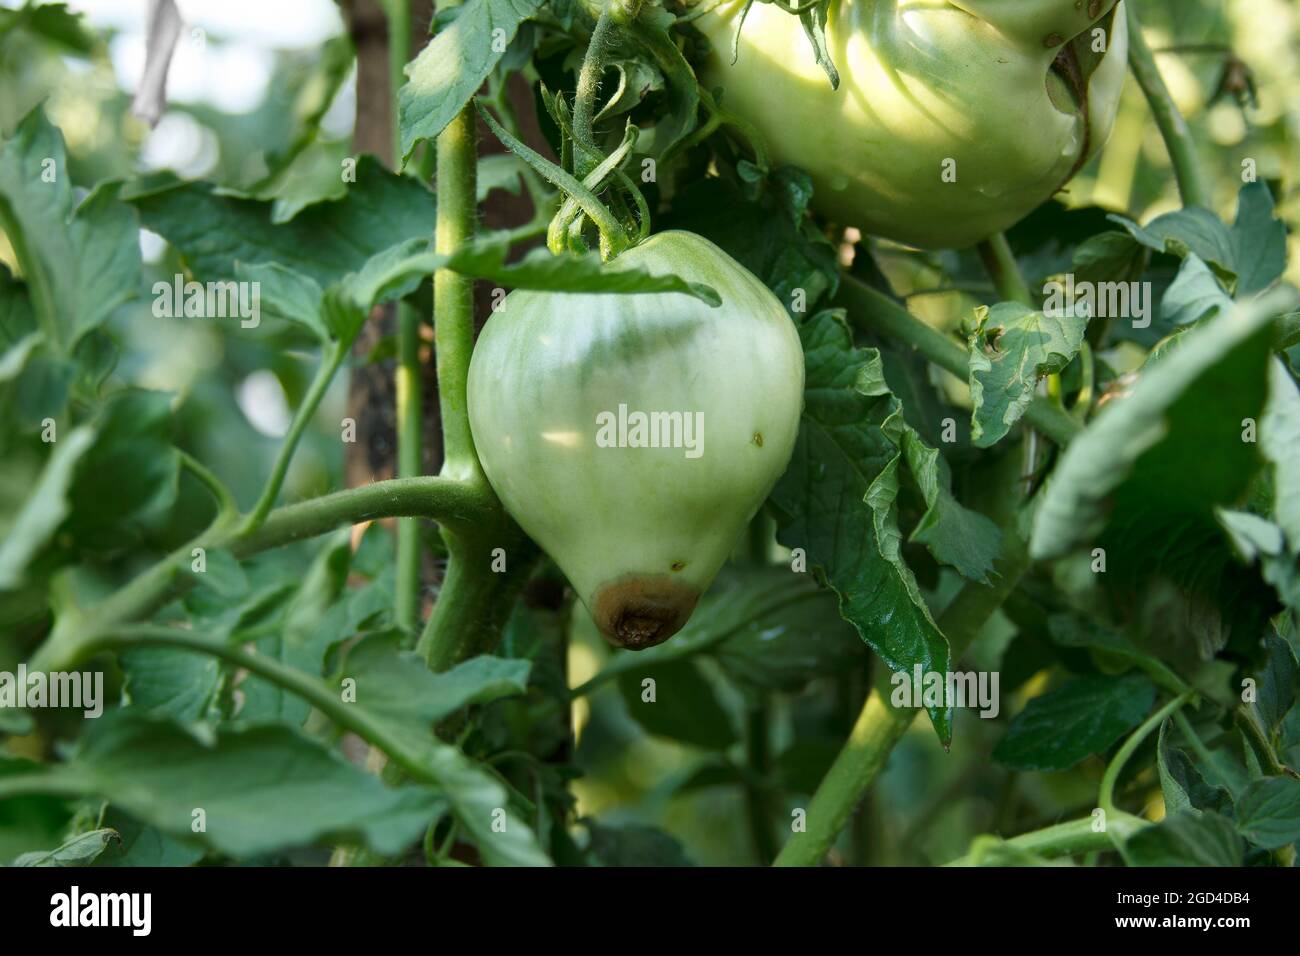 Blossom end rot. Damaged fruit on the bush. Disease of tomatoes. The green tomato close-up. Crop problems Stock Photo